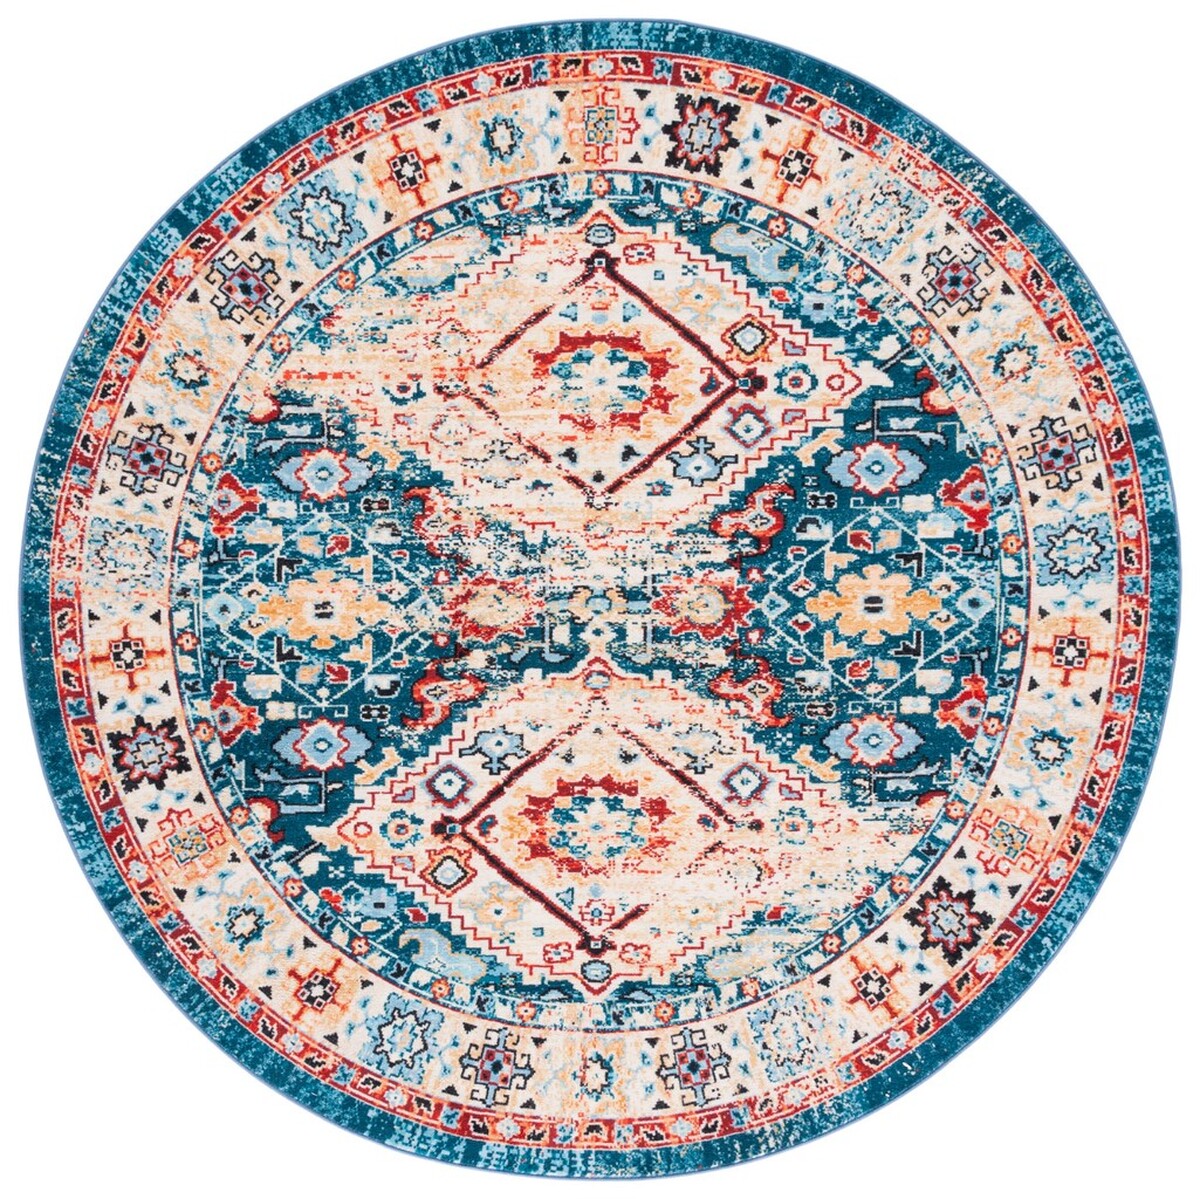 RIV157M-7R 6 ft. 7 in. x 6 ft. 7 in. Riviera 157M Power Loomed Round Area Rug, Blue & Gold -  Safavieh